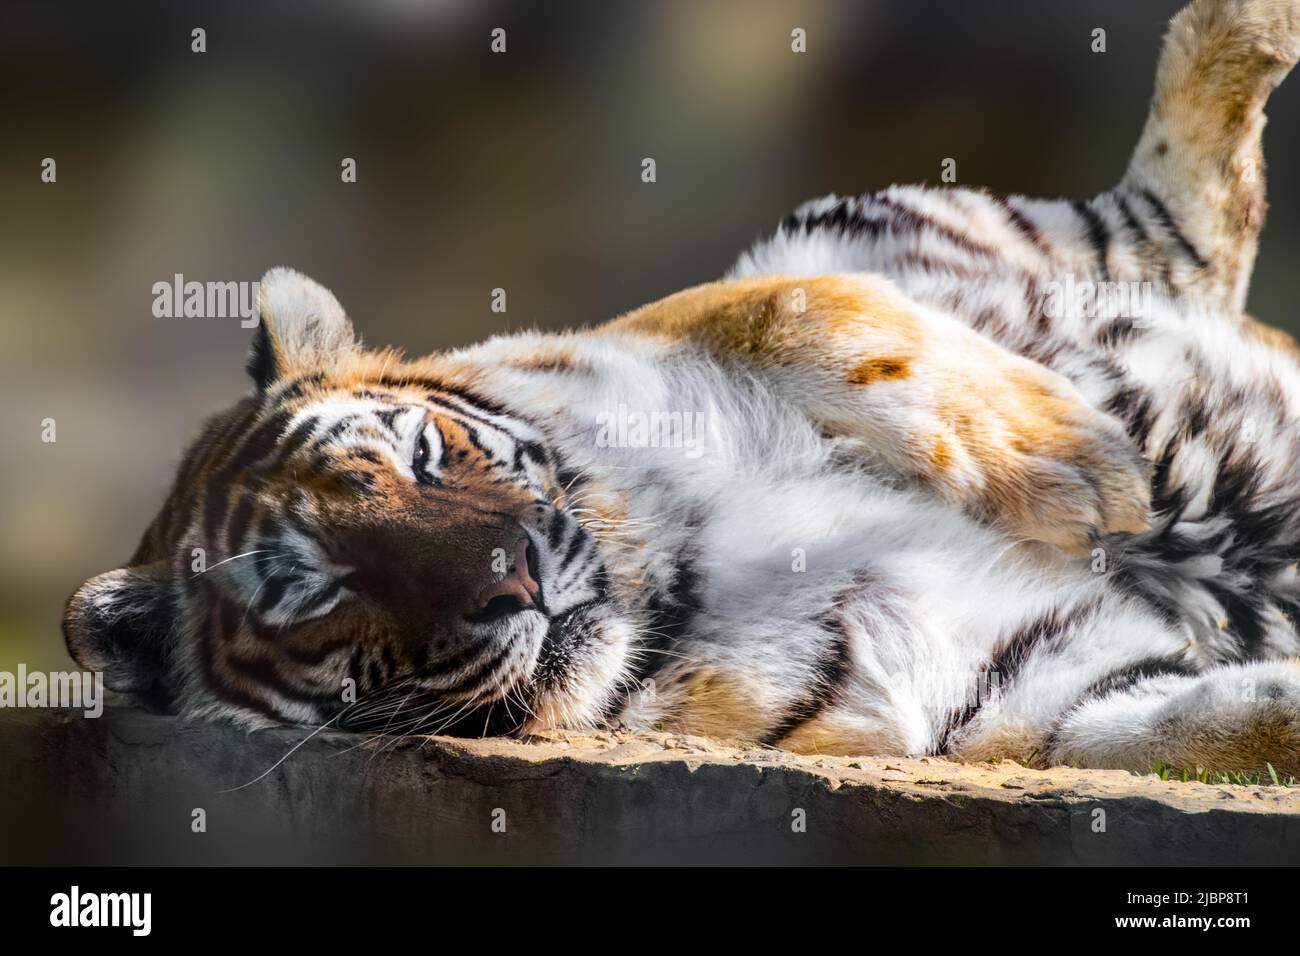 Tiger (Panthera tigris) with stripes on orange fur with a white underside peacefully laying on stone. Close view with blurred background. Wild animal, Stock Photo